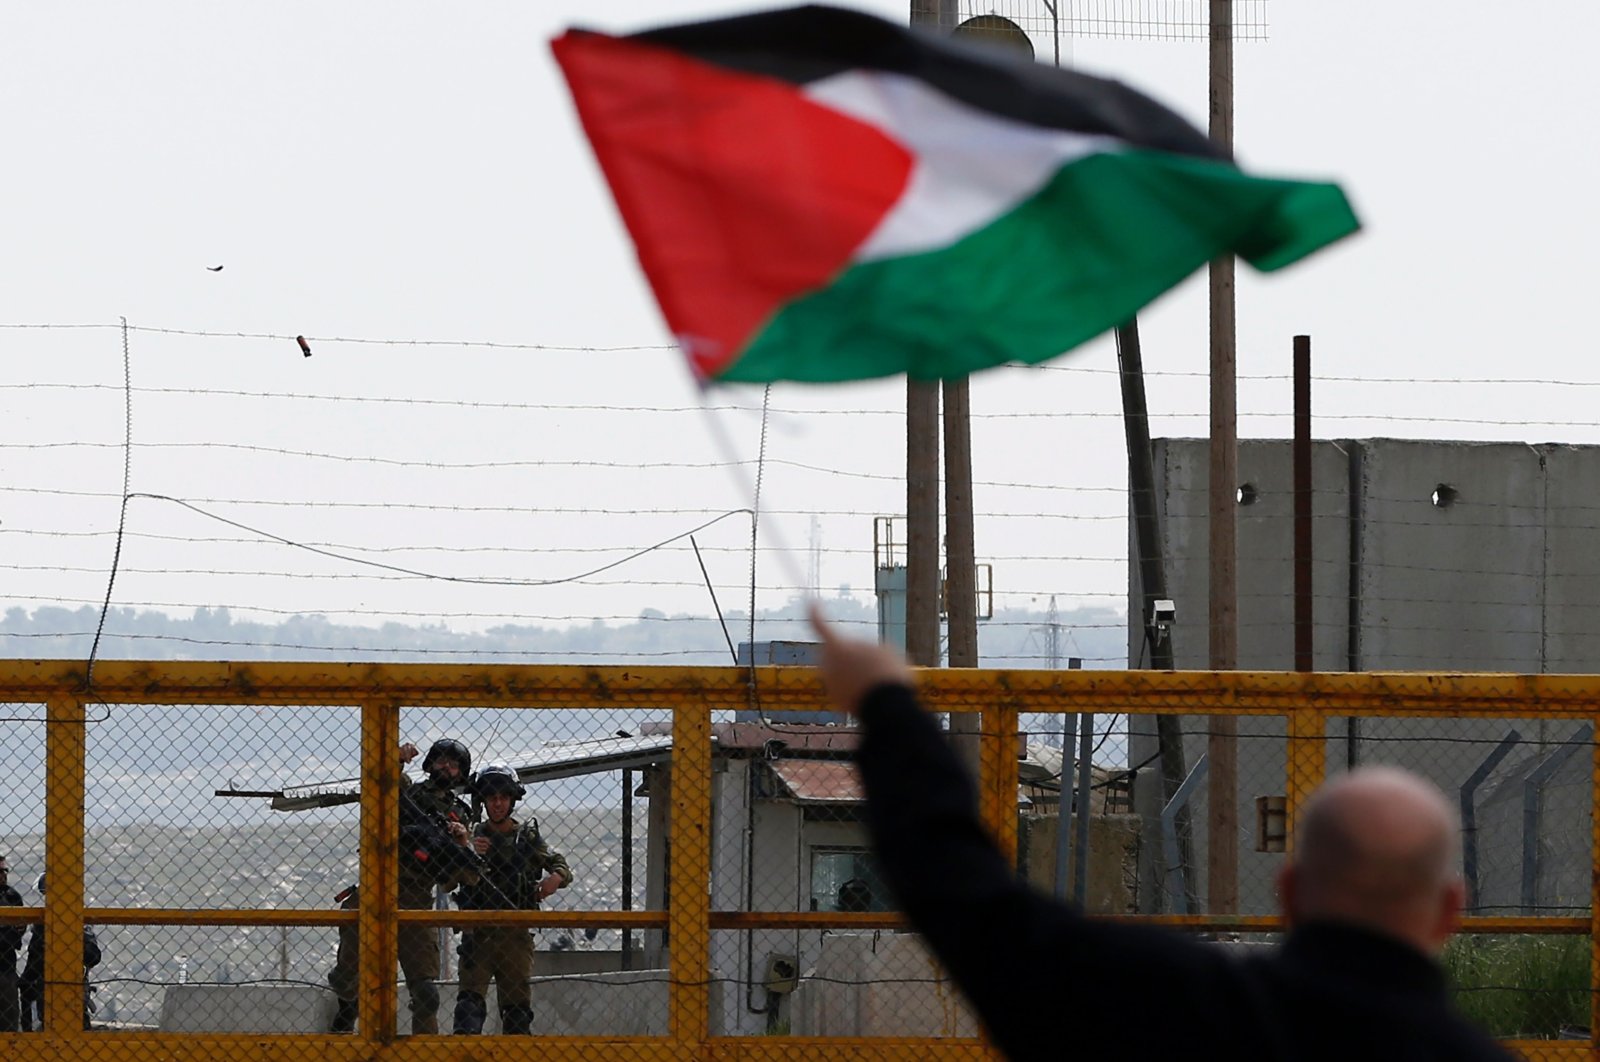 A Palestinian protester waves a national flag in front of Israeli security forces as they mark Land Day outside the compound of the Israeli-run Ofer prison near Betunia in the Israeli occupied West Bank, Palestine, March 30, 2016. (AFP Photo)